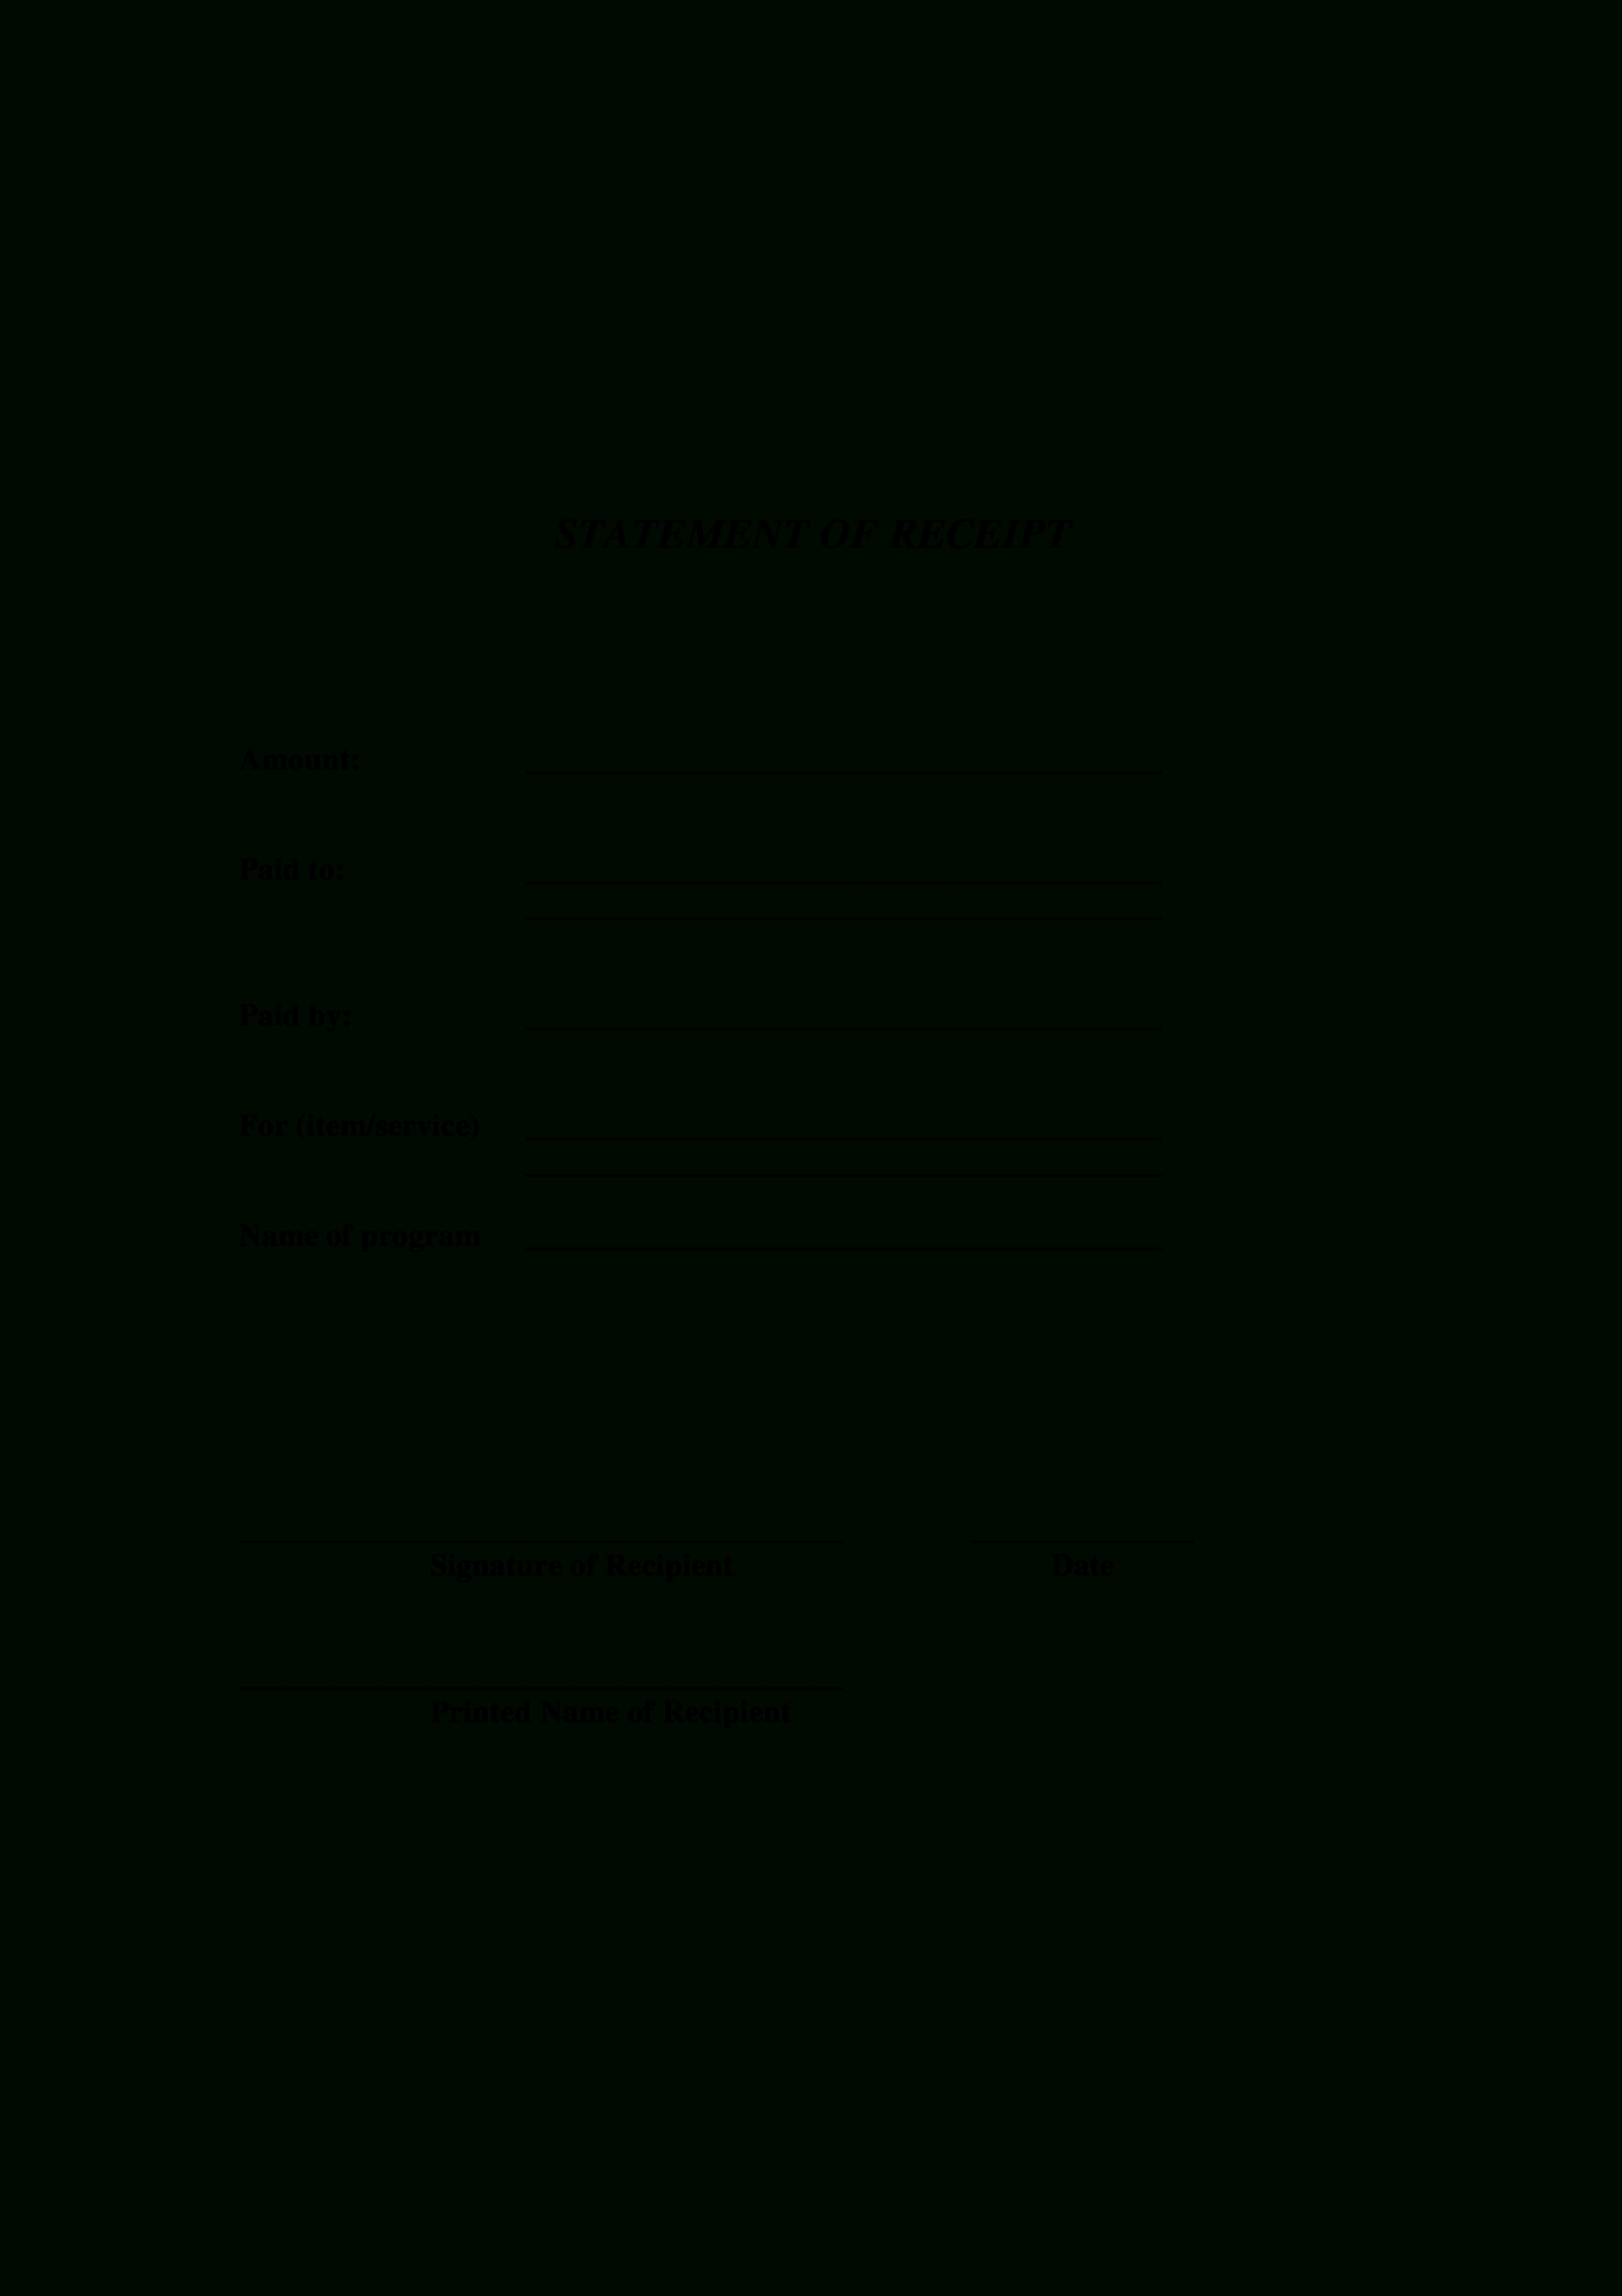 Generic Receipt Template – Oflu.bntl For This Entitles The Bearer To Template Certificate